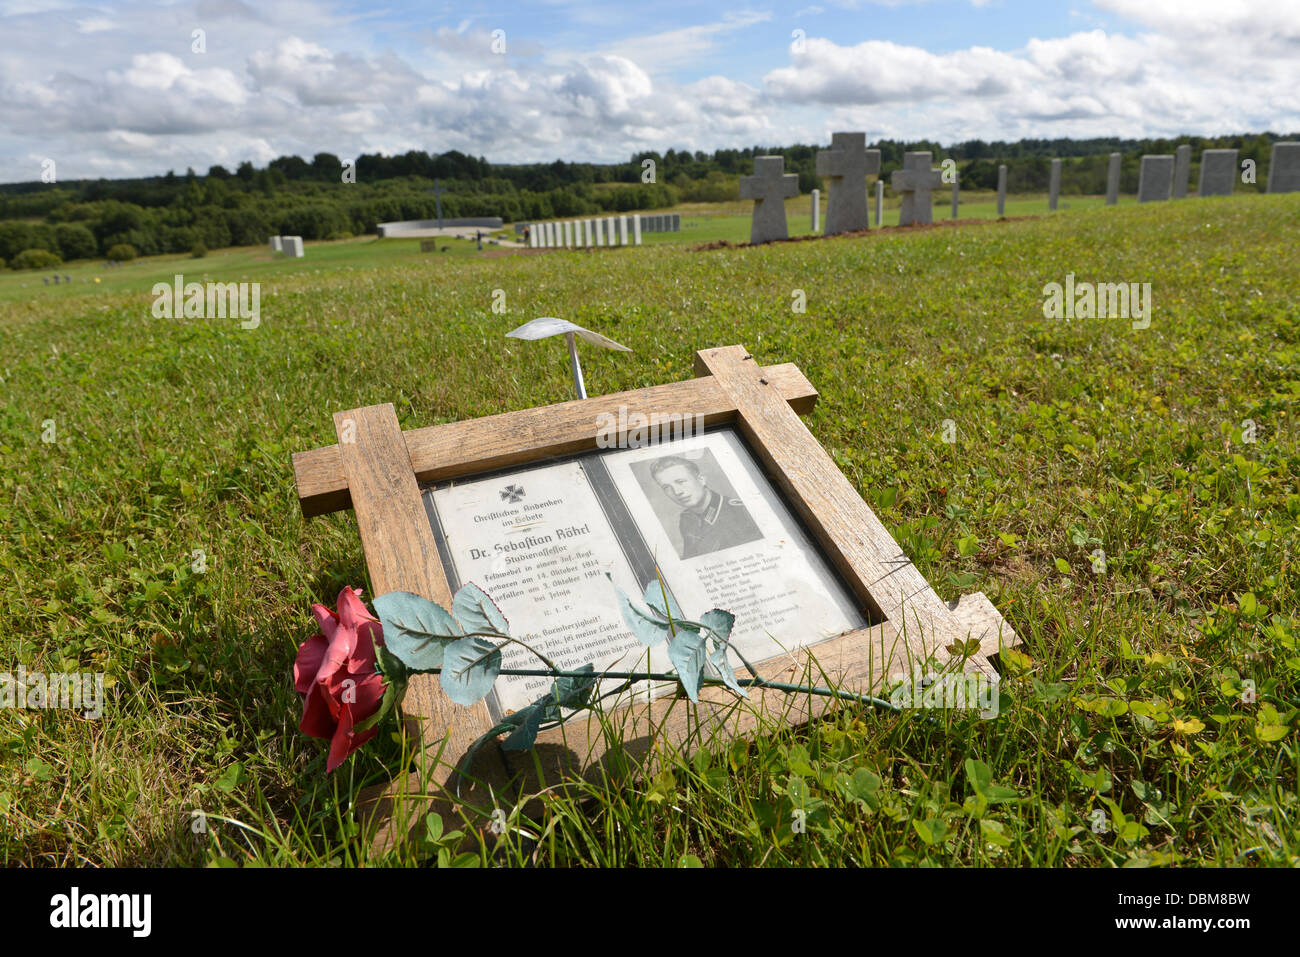 The German Military Cemetery in Dukhovshchina, Smolensk Oblast, Russia, 01 August 2013. 68 years after the end of World War II, the German Defence Minister will inaugurate the cemetery on 03 August 2013. Photo: UWE ZUCCHI Stock Photo